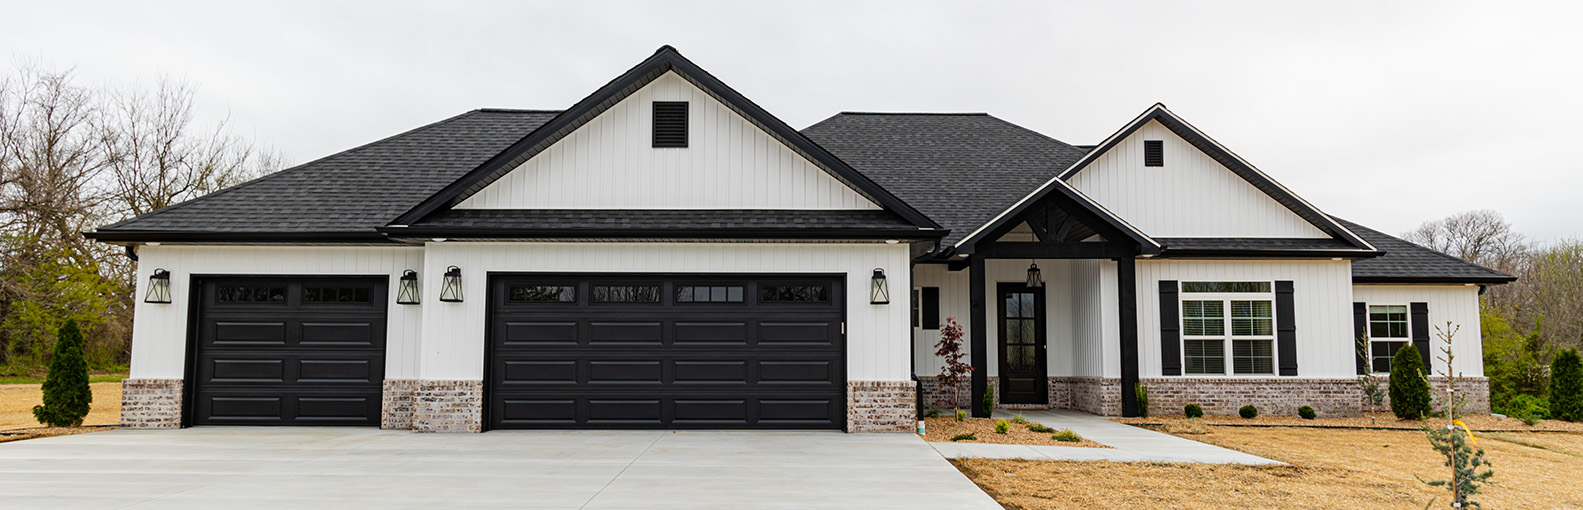 A white farmhouse with black trim, doors and accents